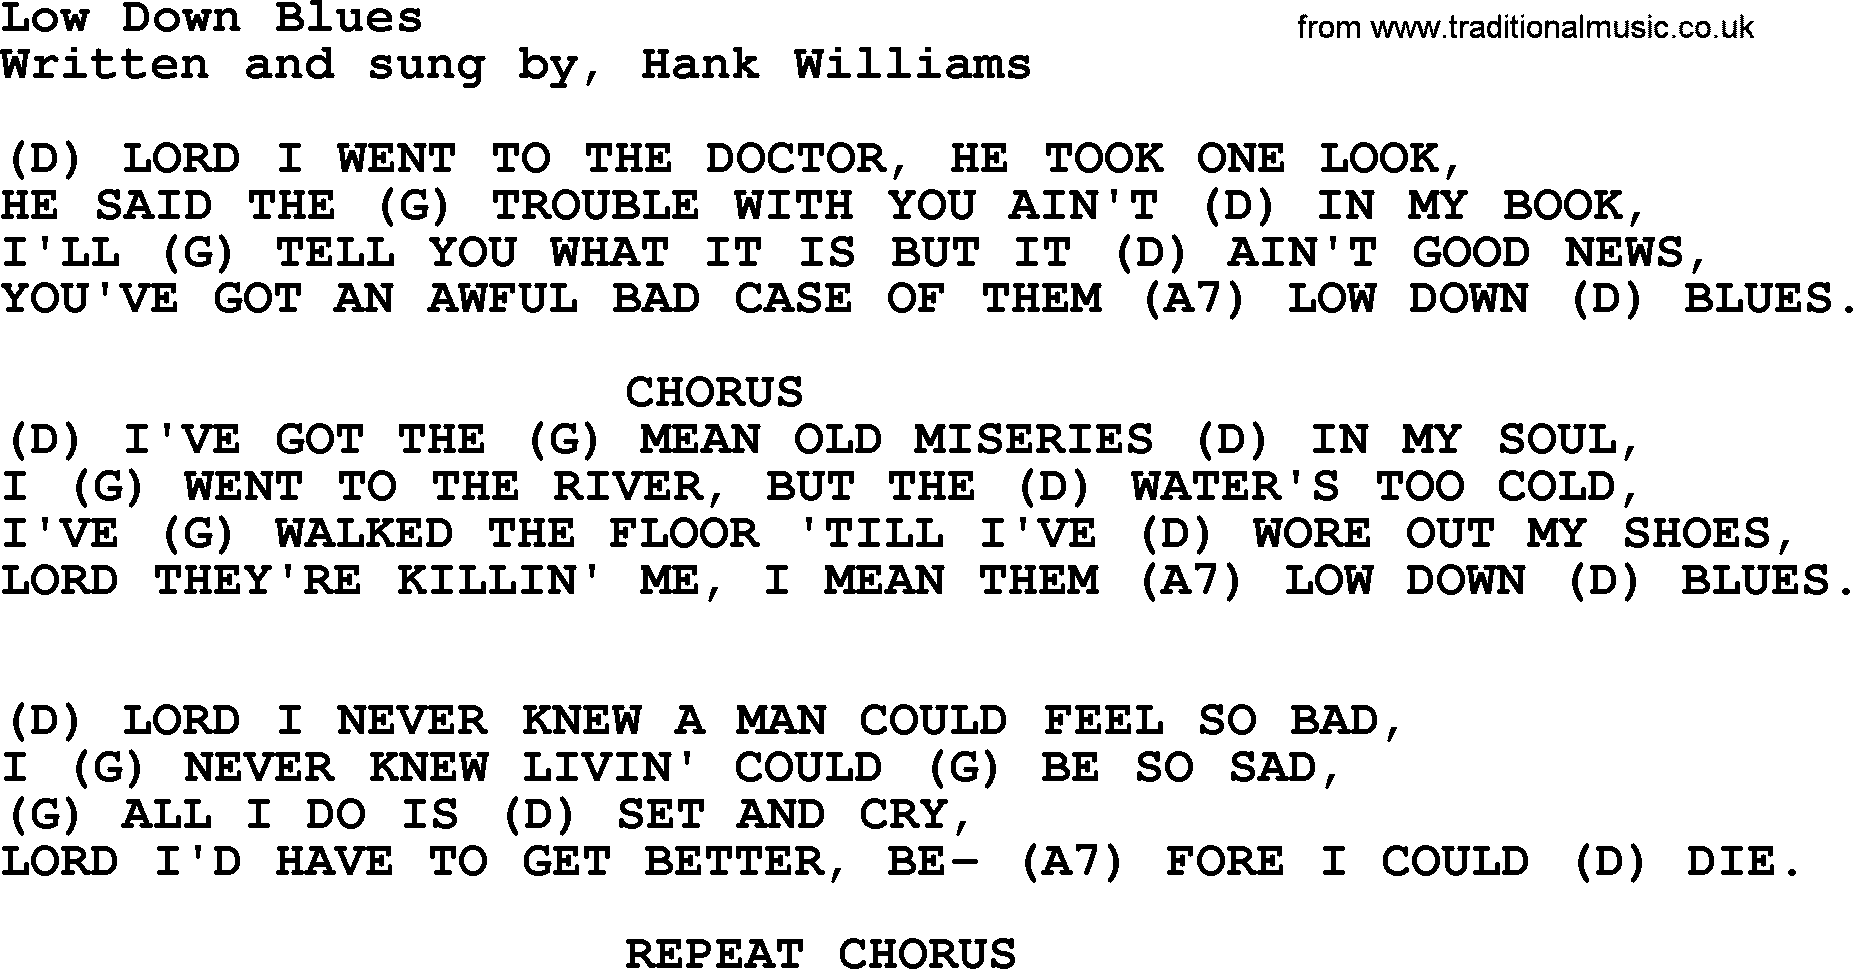 Hank Williams song Low Down Blues, lyrics and chords